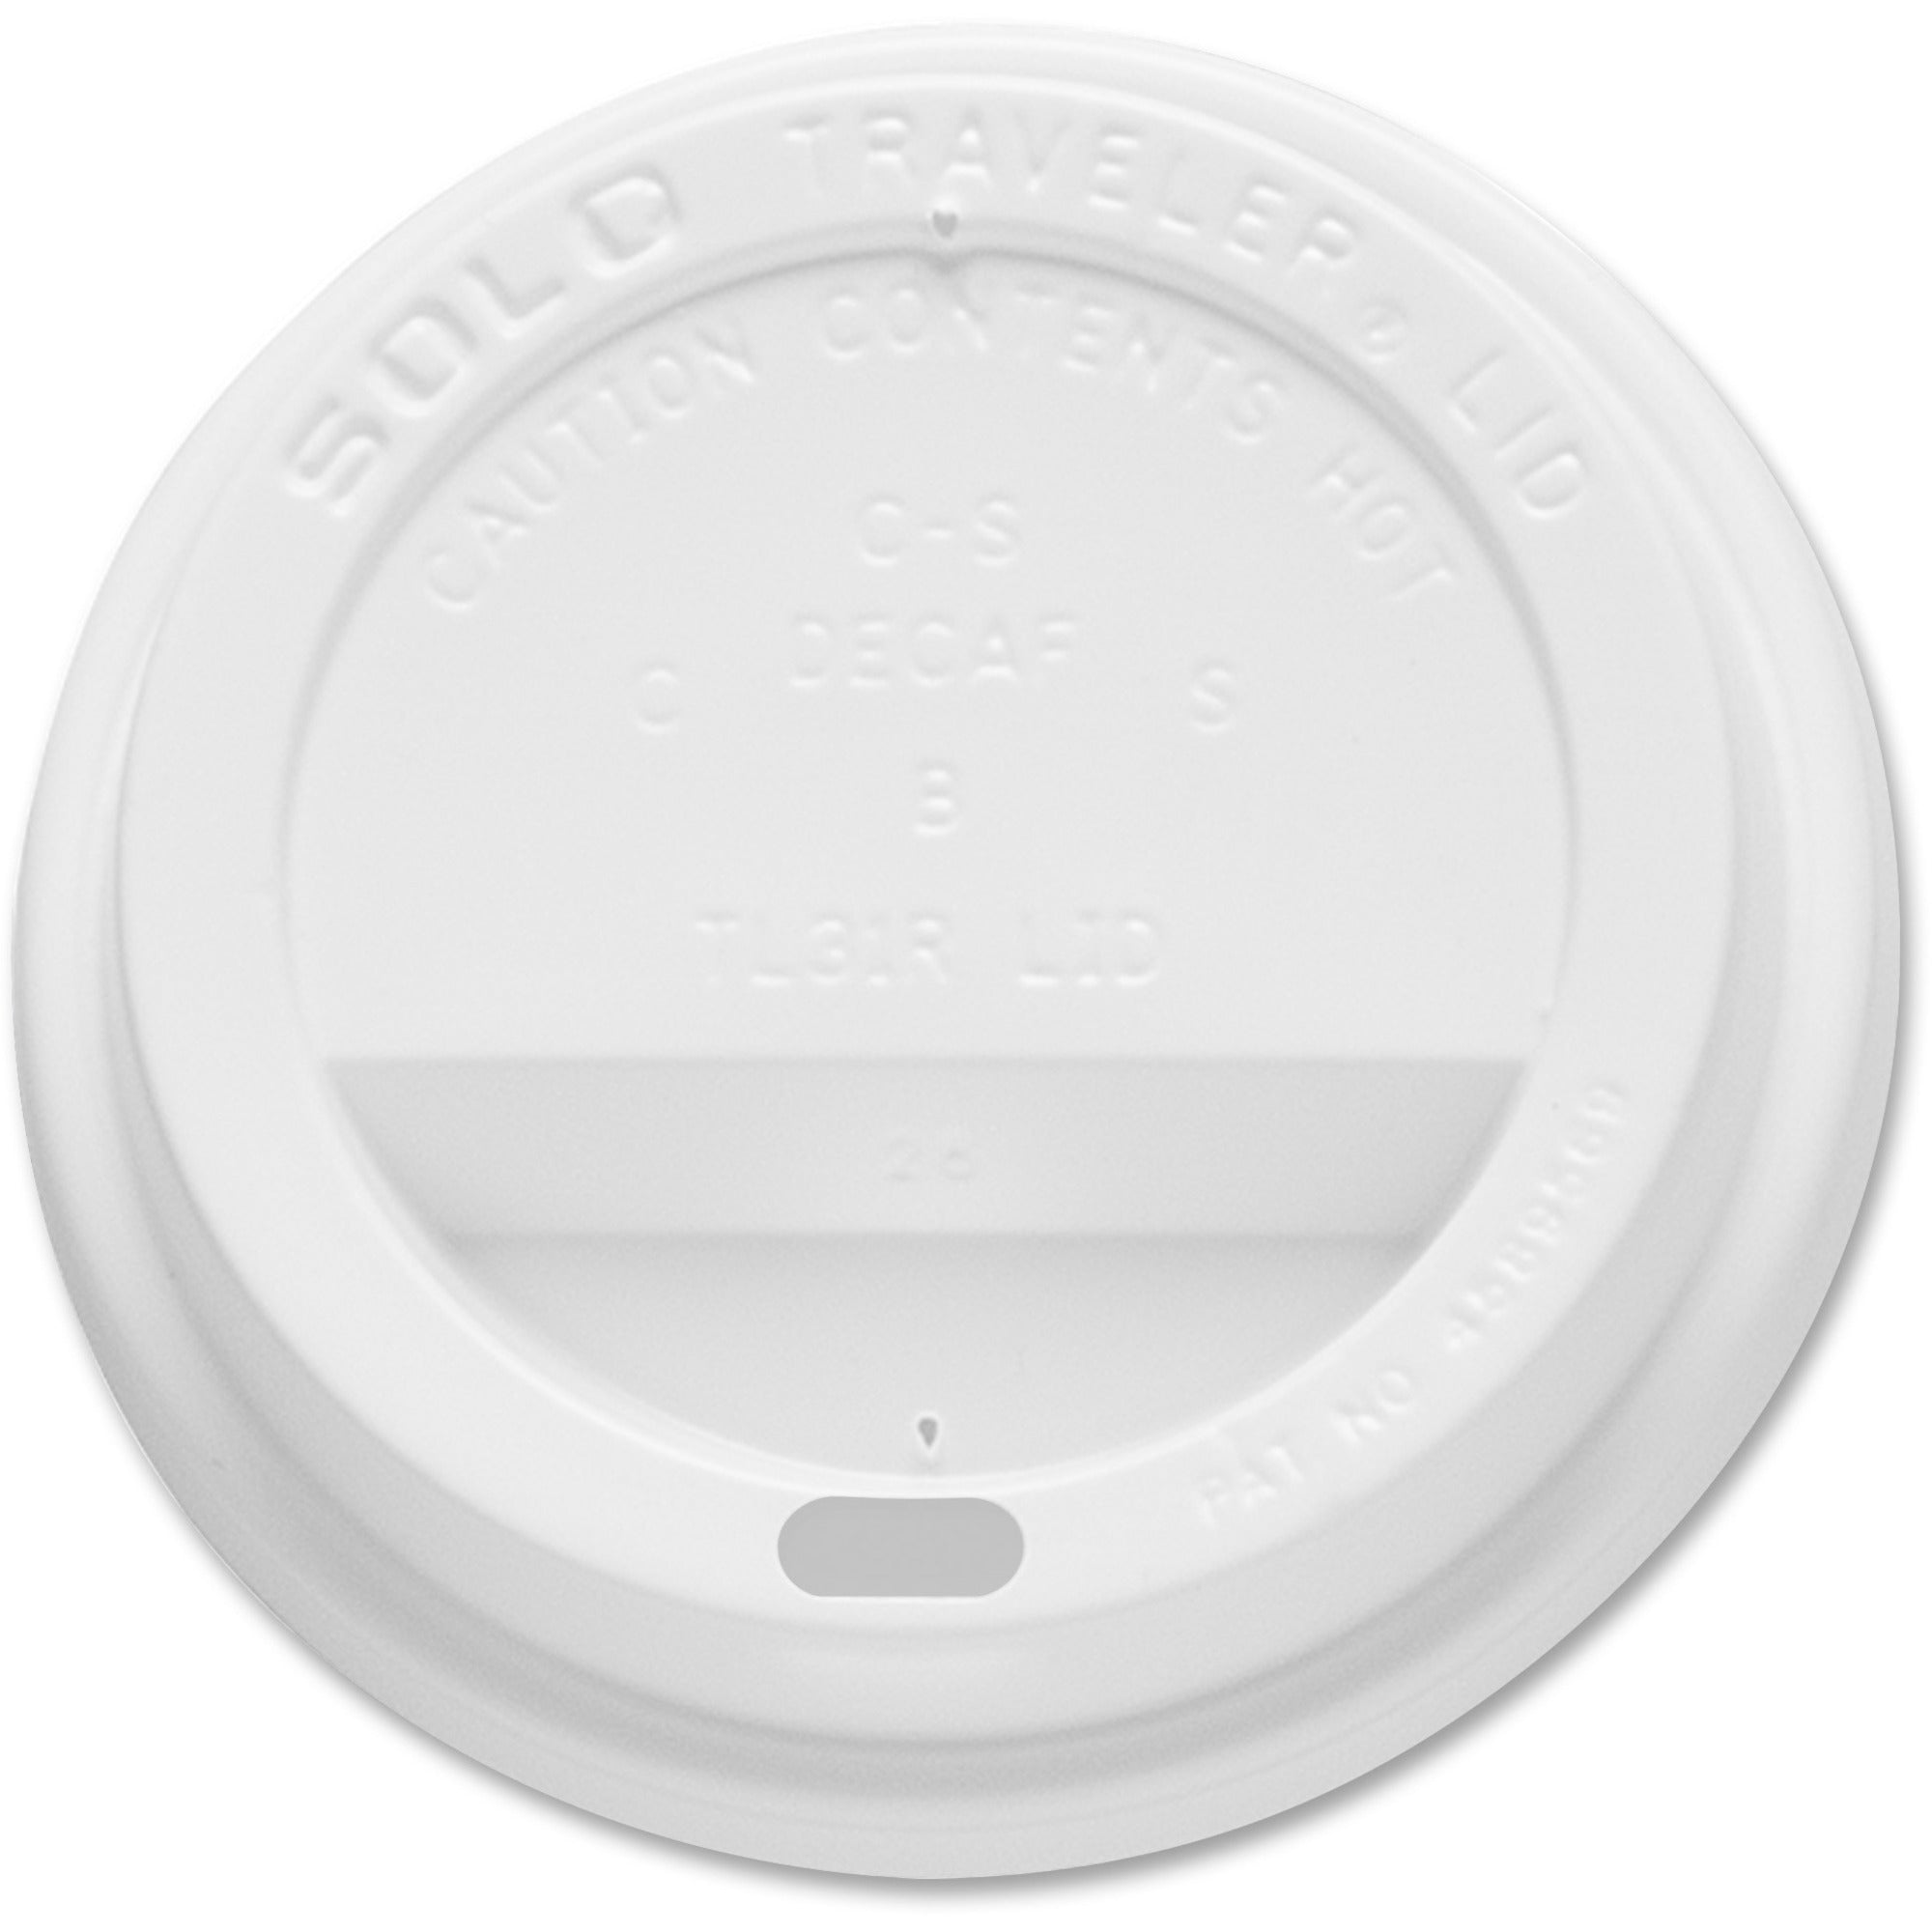 Solo Cup Hot Traveler Cup Lid - 10 / Carton - 125 Per Pack - White